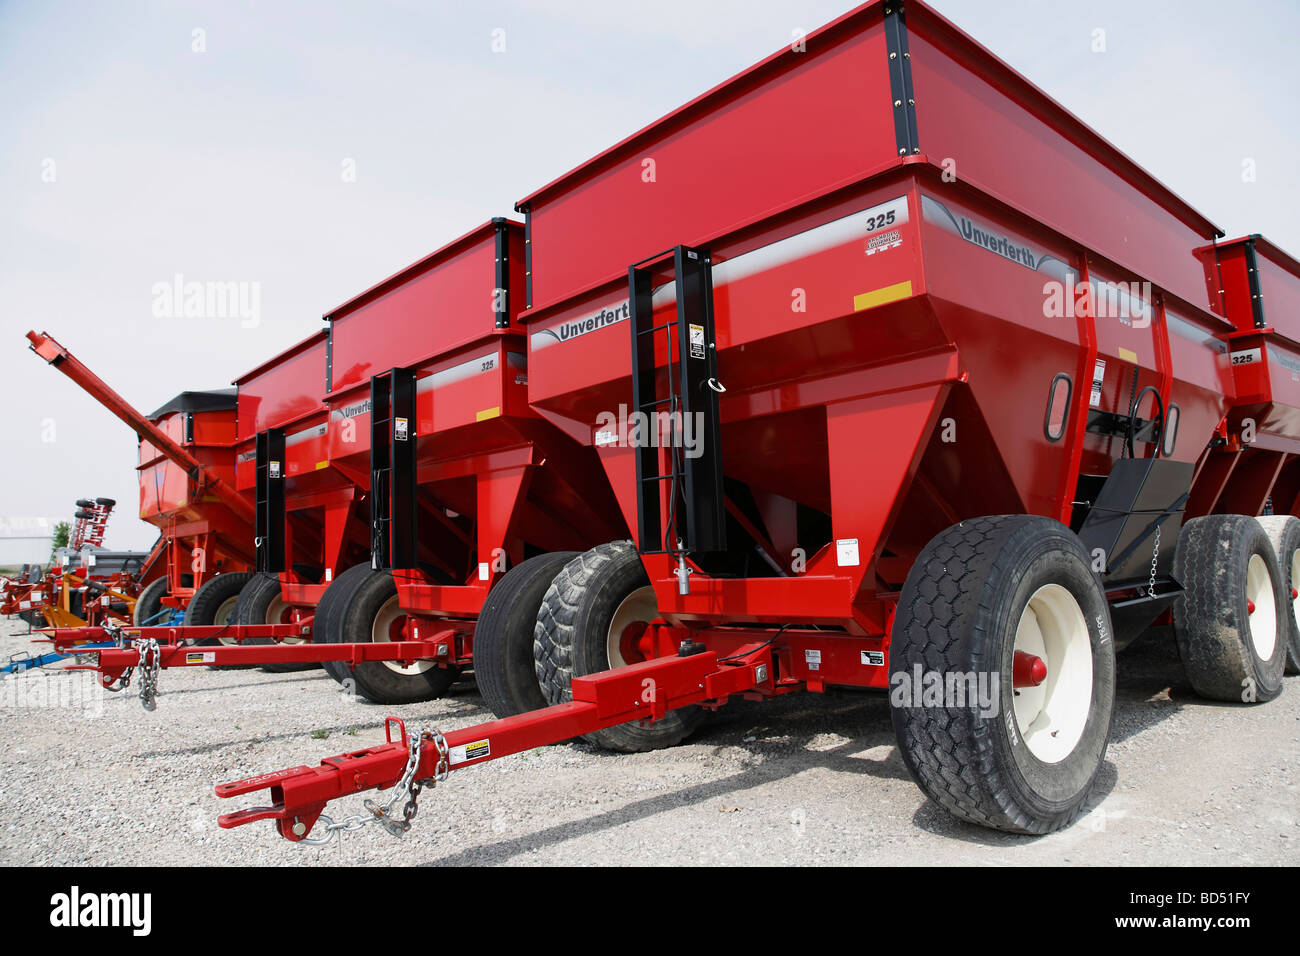 Agricultural agriculture farming grain Heavy duty equipment Unverferth wagon wagons nobody in USA hi-res Stock Photo